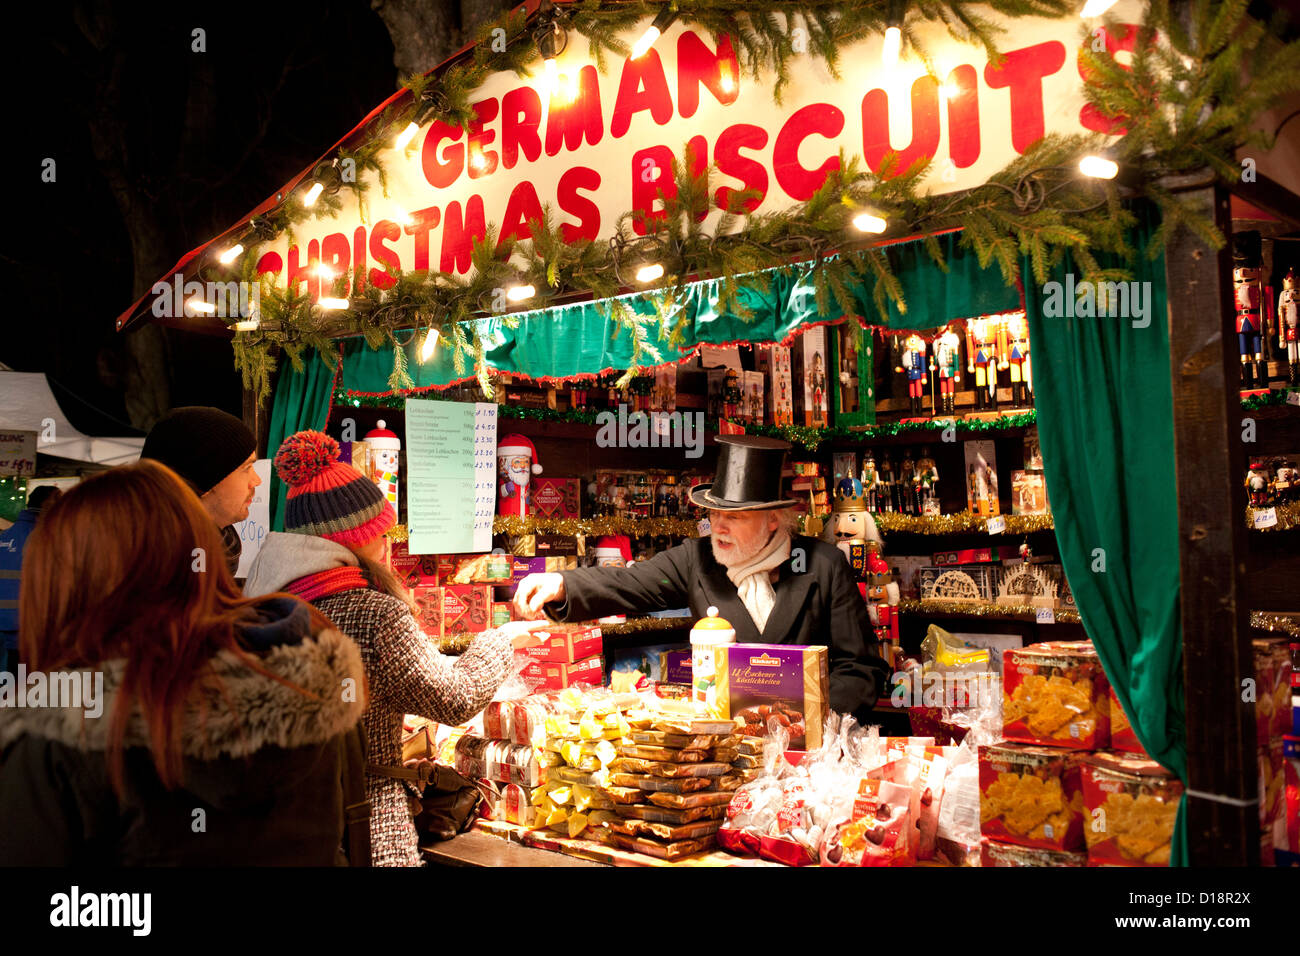 The annual Christmas market in Lincoln, England, UK. A German Biscuit seller on his stall. Stock Photo